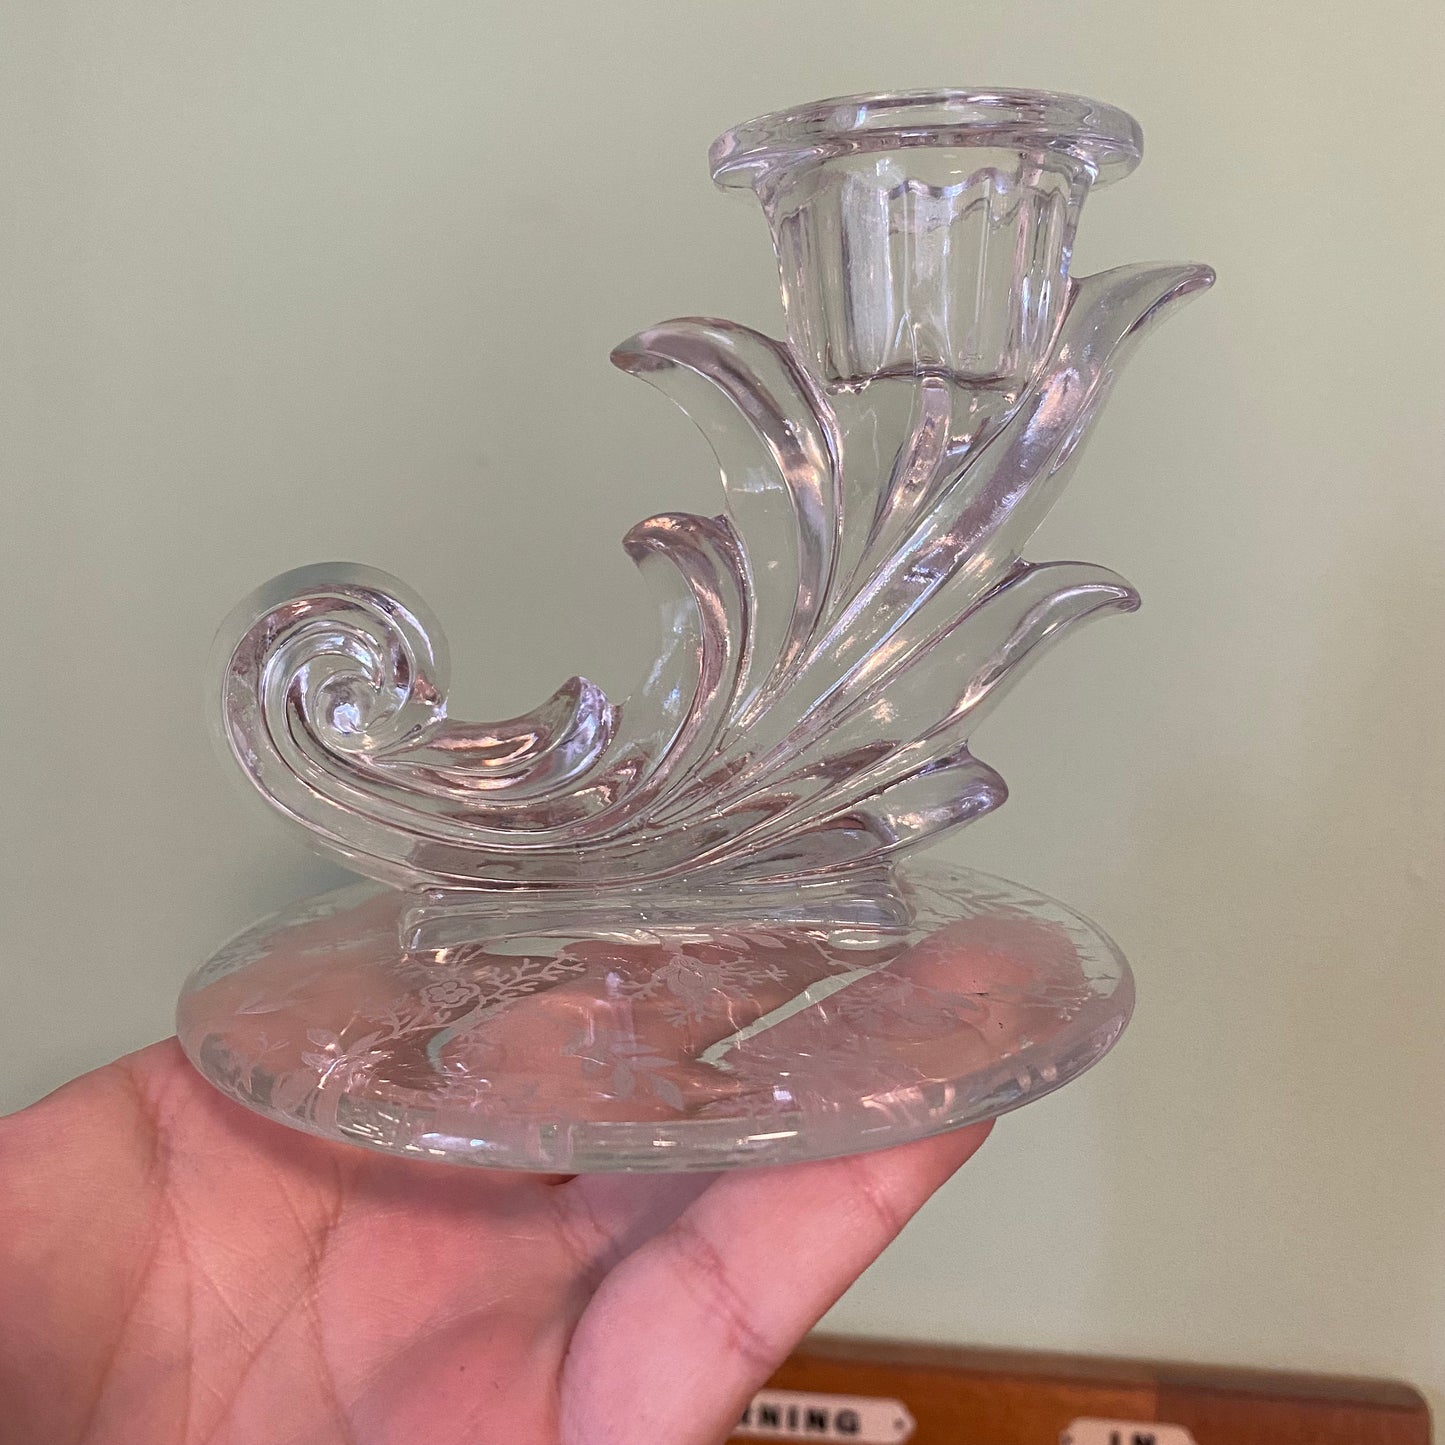 Vintage clear glass art deco candle holders with rose vine design. Pretty decorative candlestick holders for tapers. Aesthetic altar decor